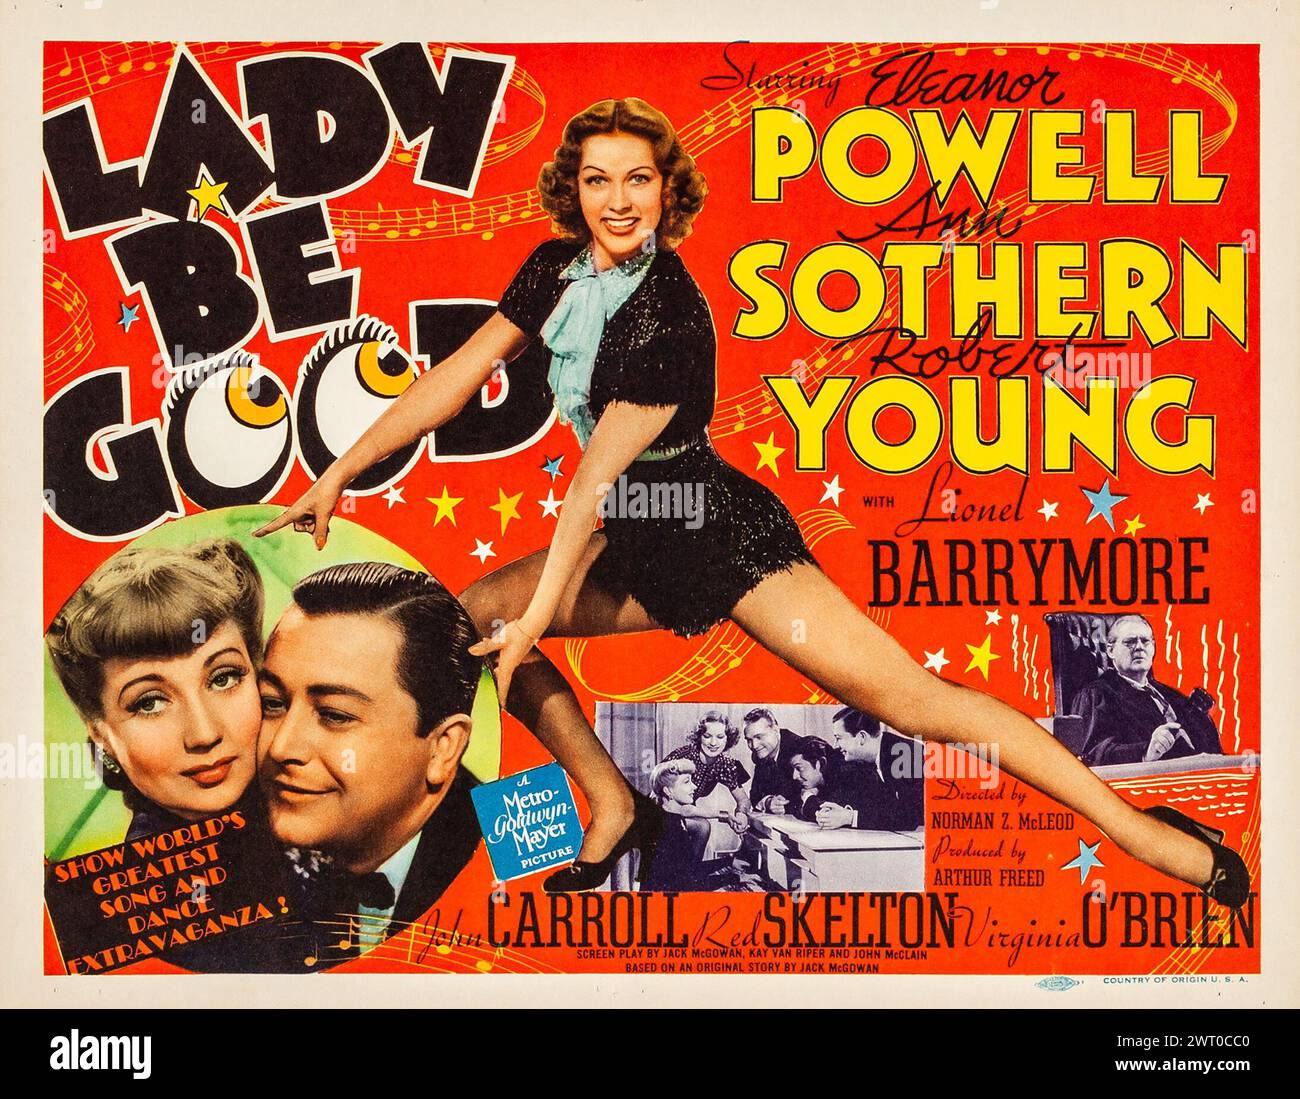 Poster cinematografico vintage per il film MGM del 1941 Lady Be Good. Eleanor Powell, Ann Sothern e Robert Young Foto Stock